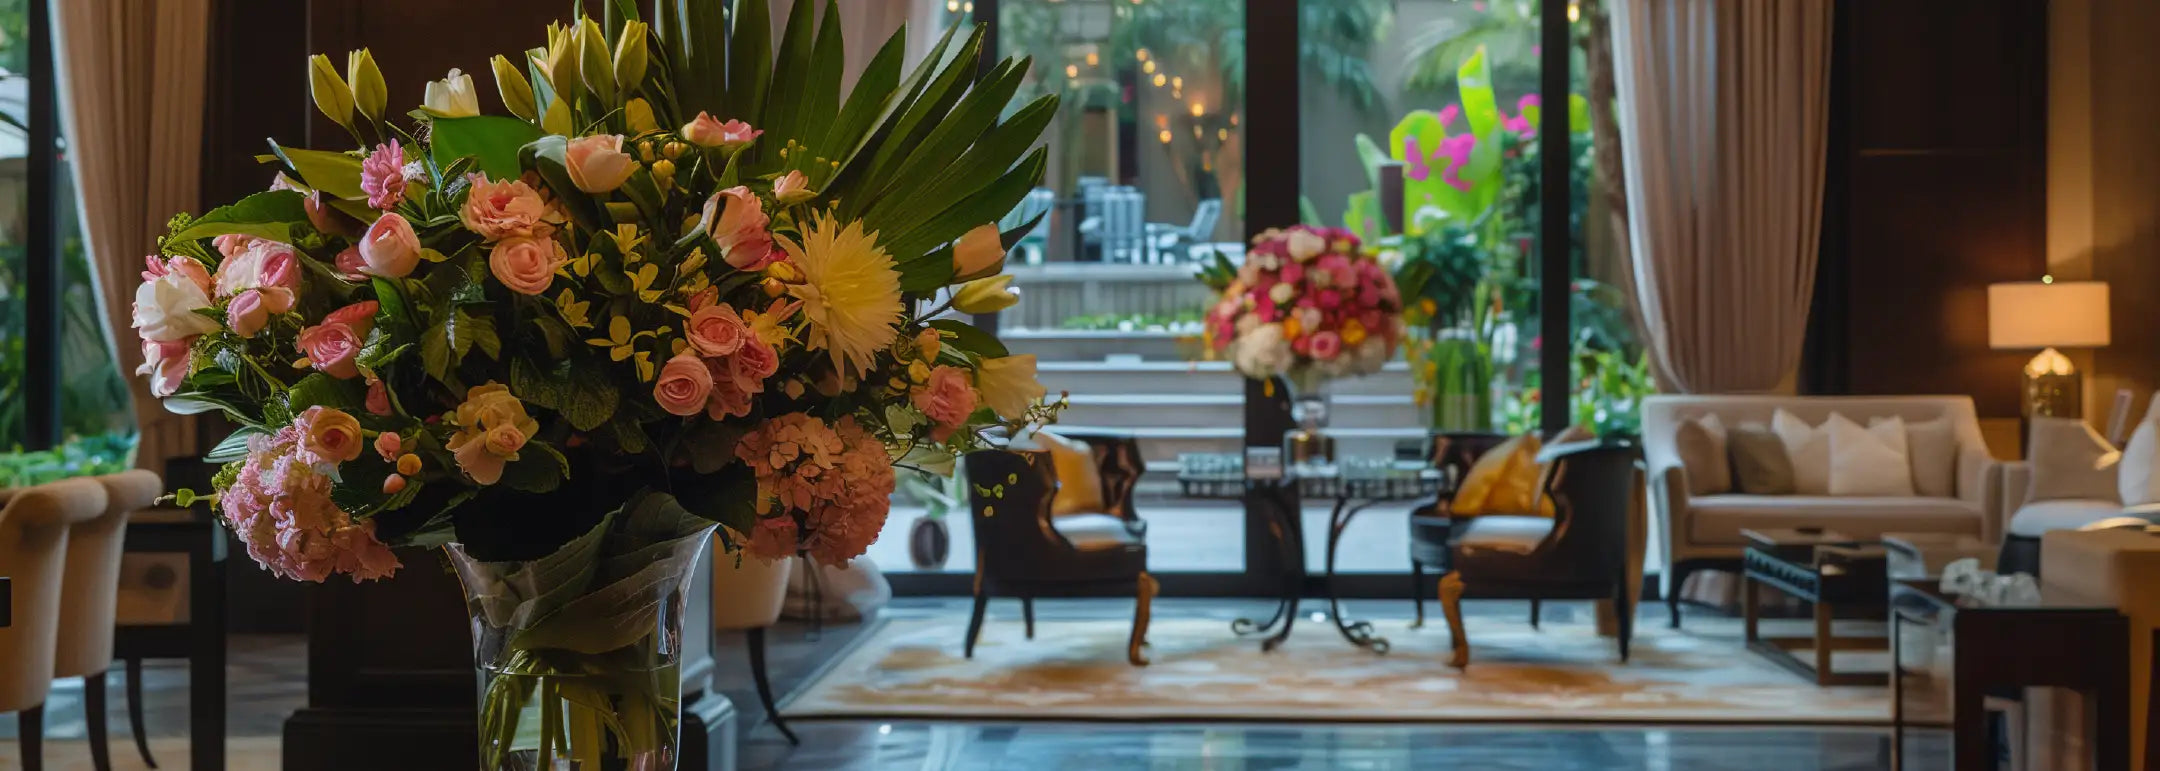 Luxurious living space with elegant floral arrangements and modern decor. Turn your space into something fabulous. Fabulous Flowers and Gifts. Airbnb, Guest House and Hotel.